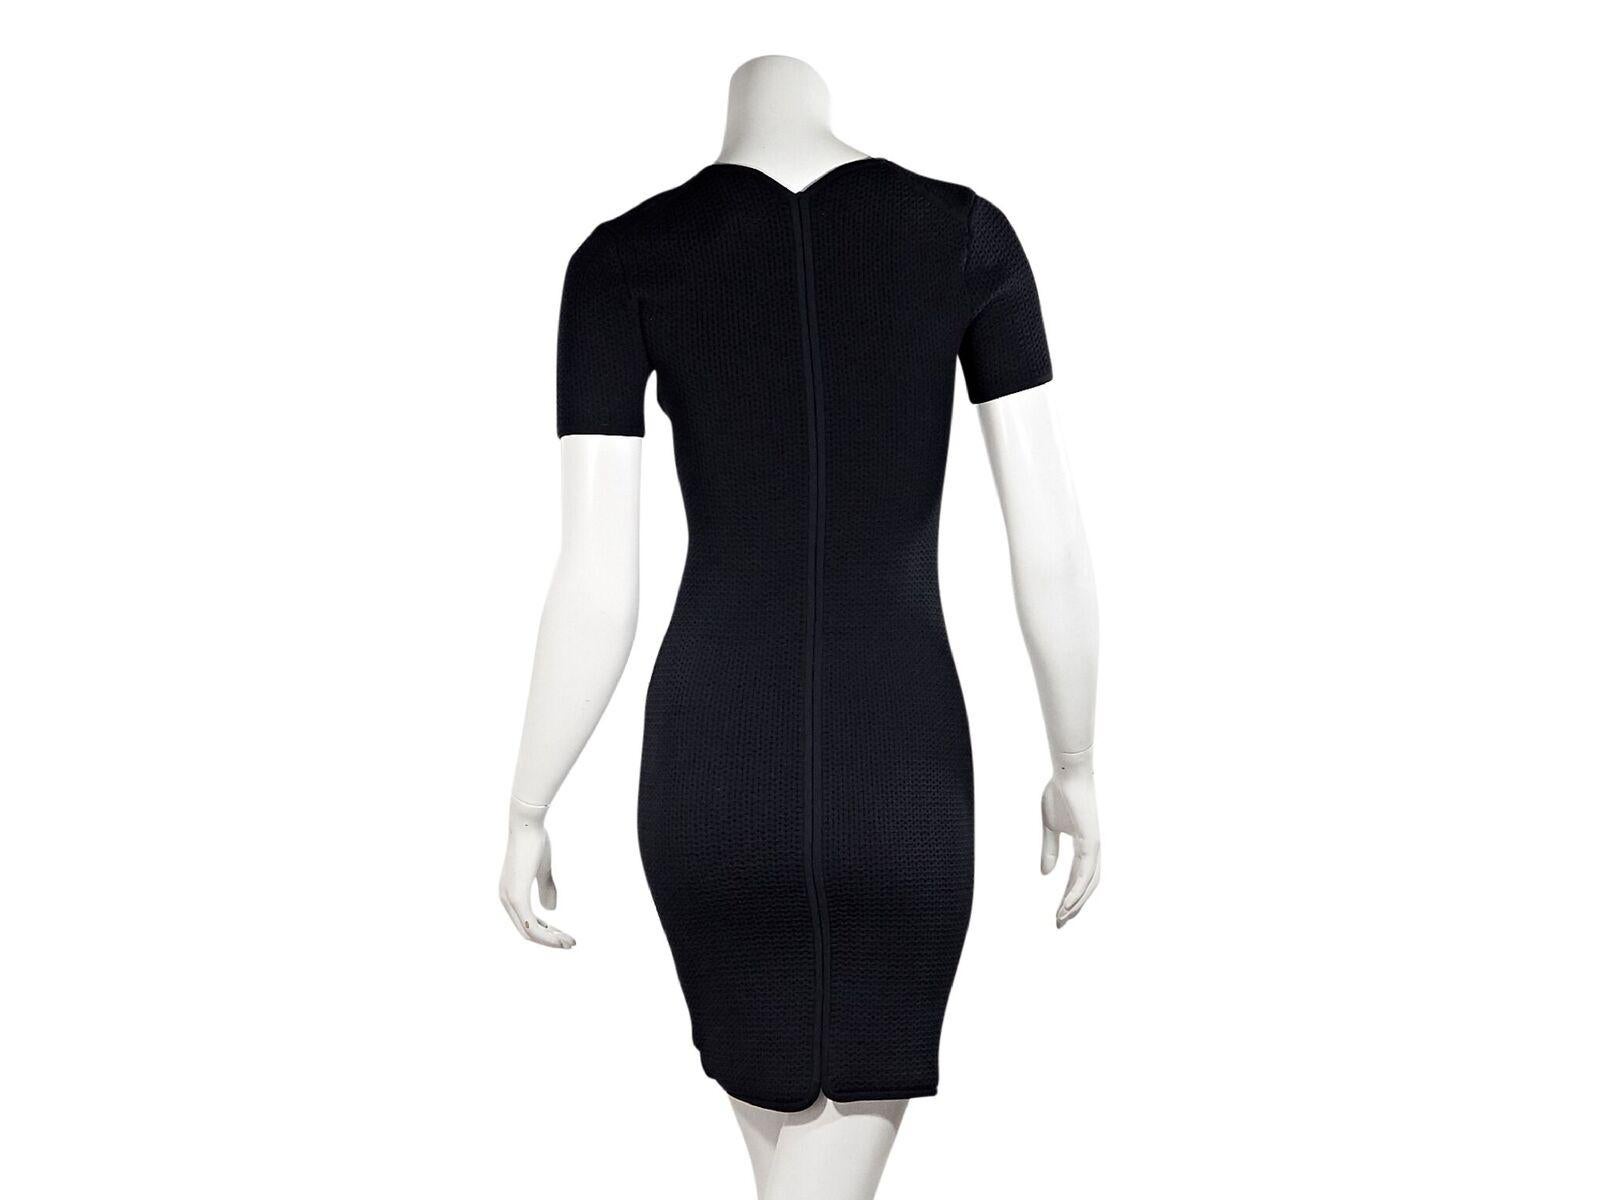 Product details:  Navy blue waffle knit sheath dress by Alexander Wang.  Stretch fit. Crewneck.  Short sleeves.  Pullover style.  34